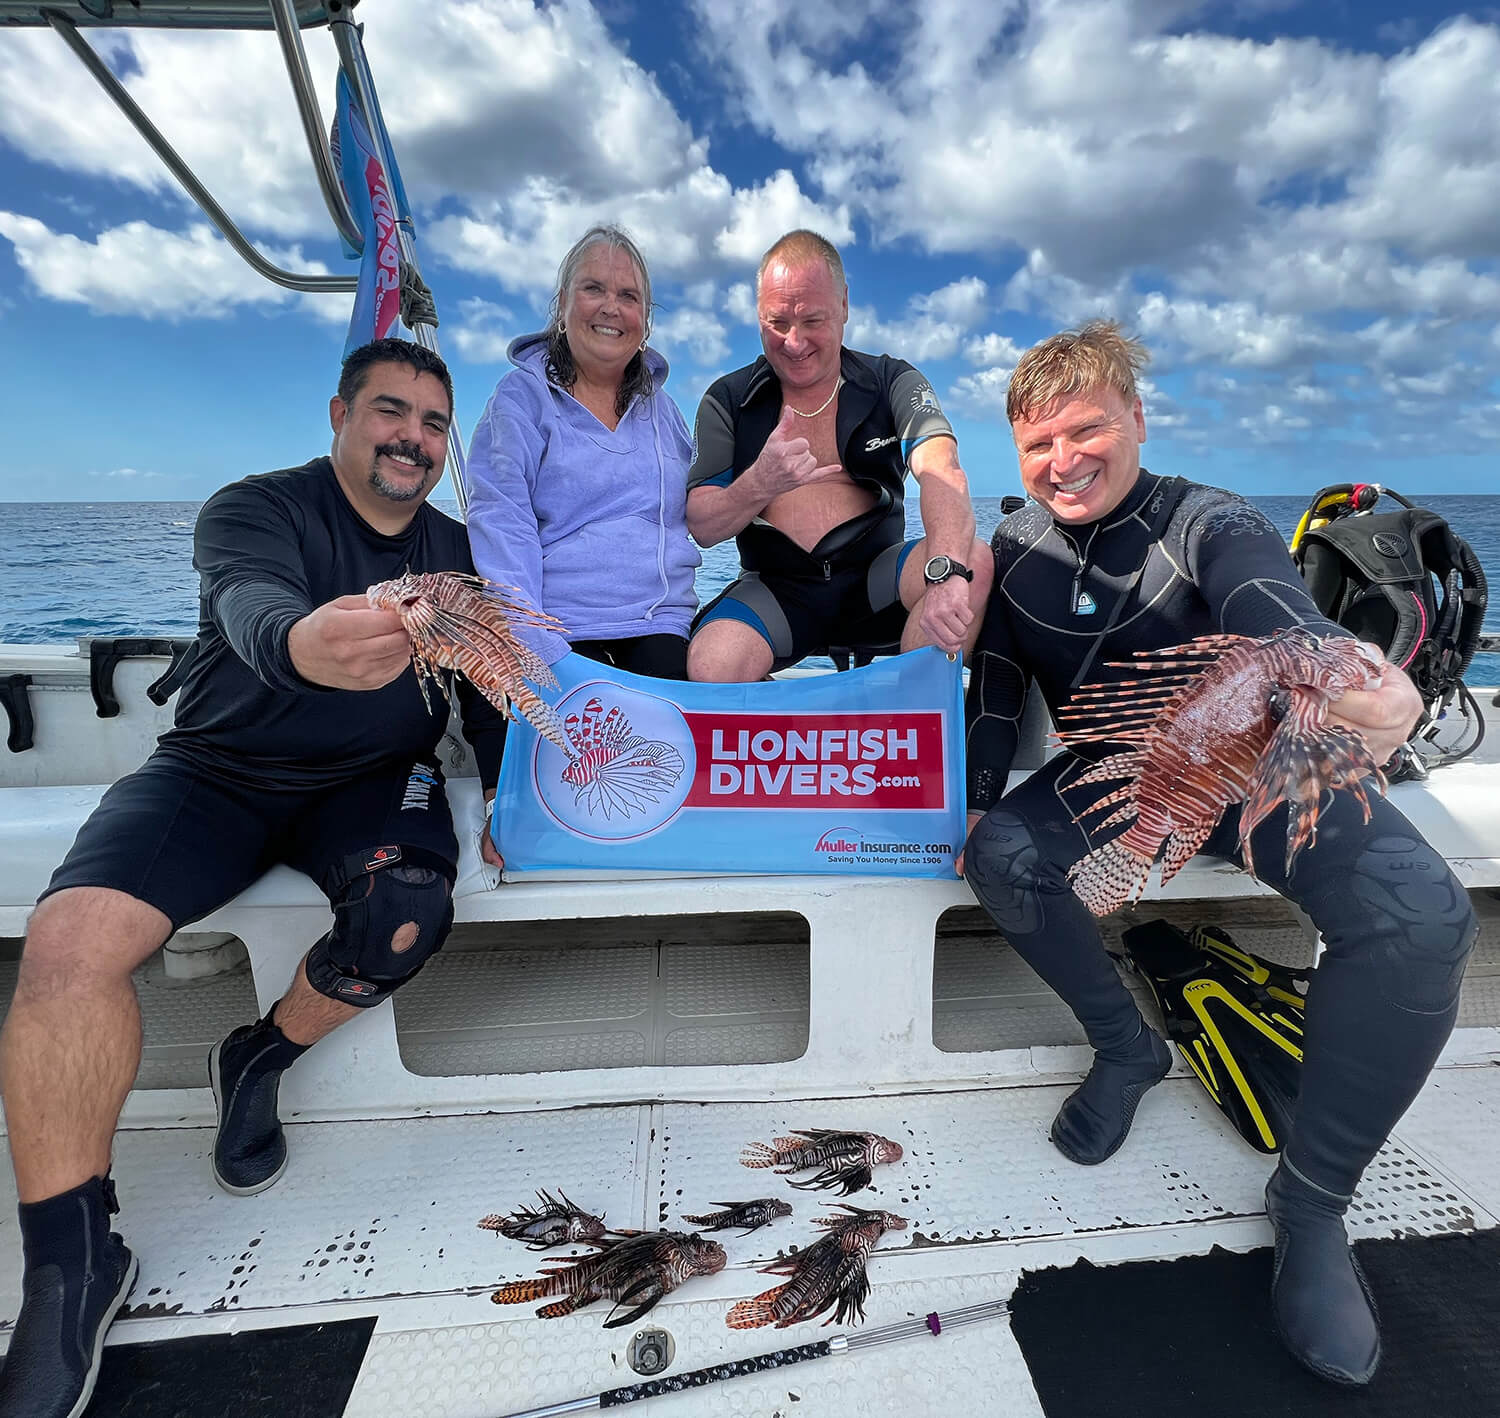 Lionfish hunters on dive boat